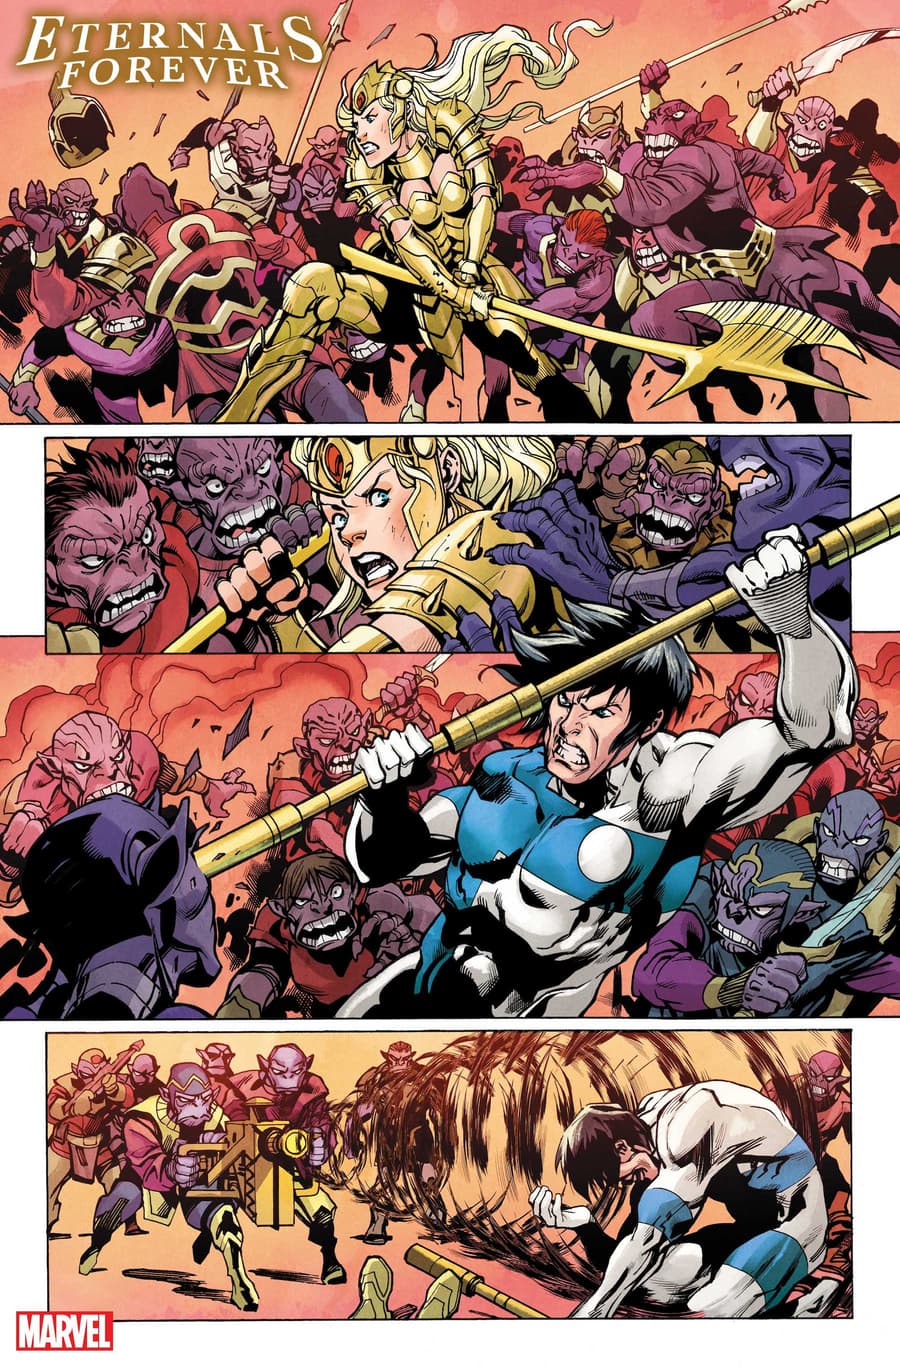 ETERNALS FOREVER #1 preview art by Ramon Bachs with colors by Rachelle Rosenberg